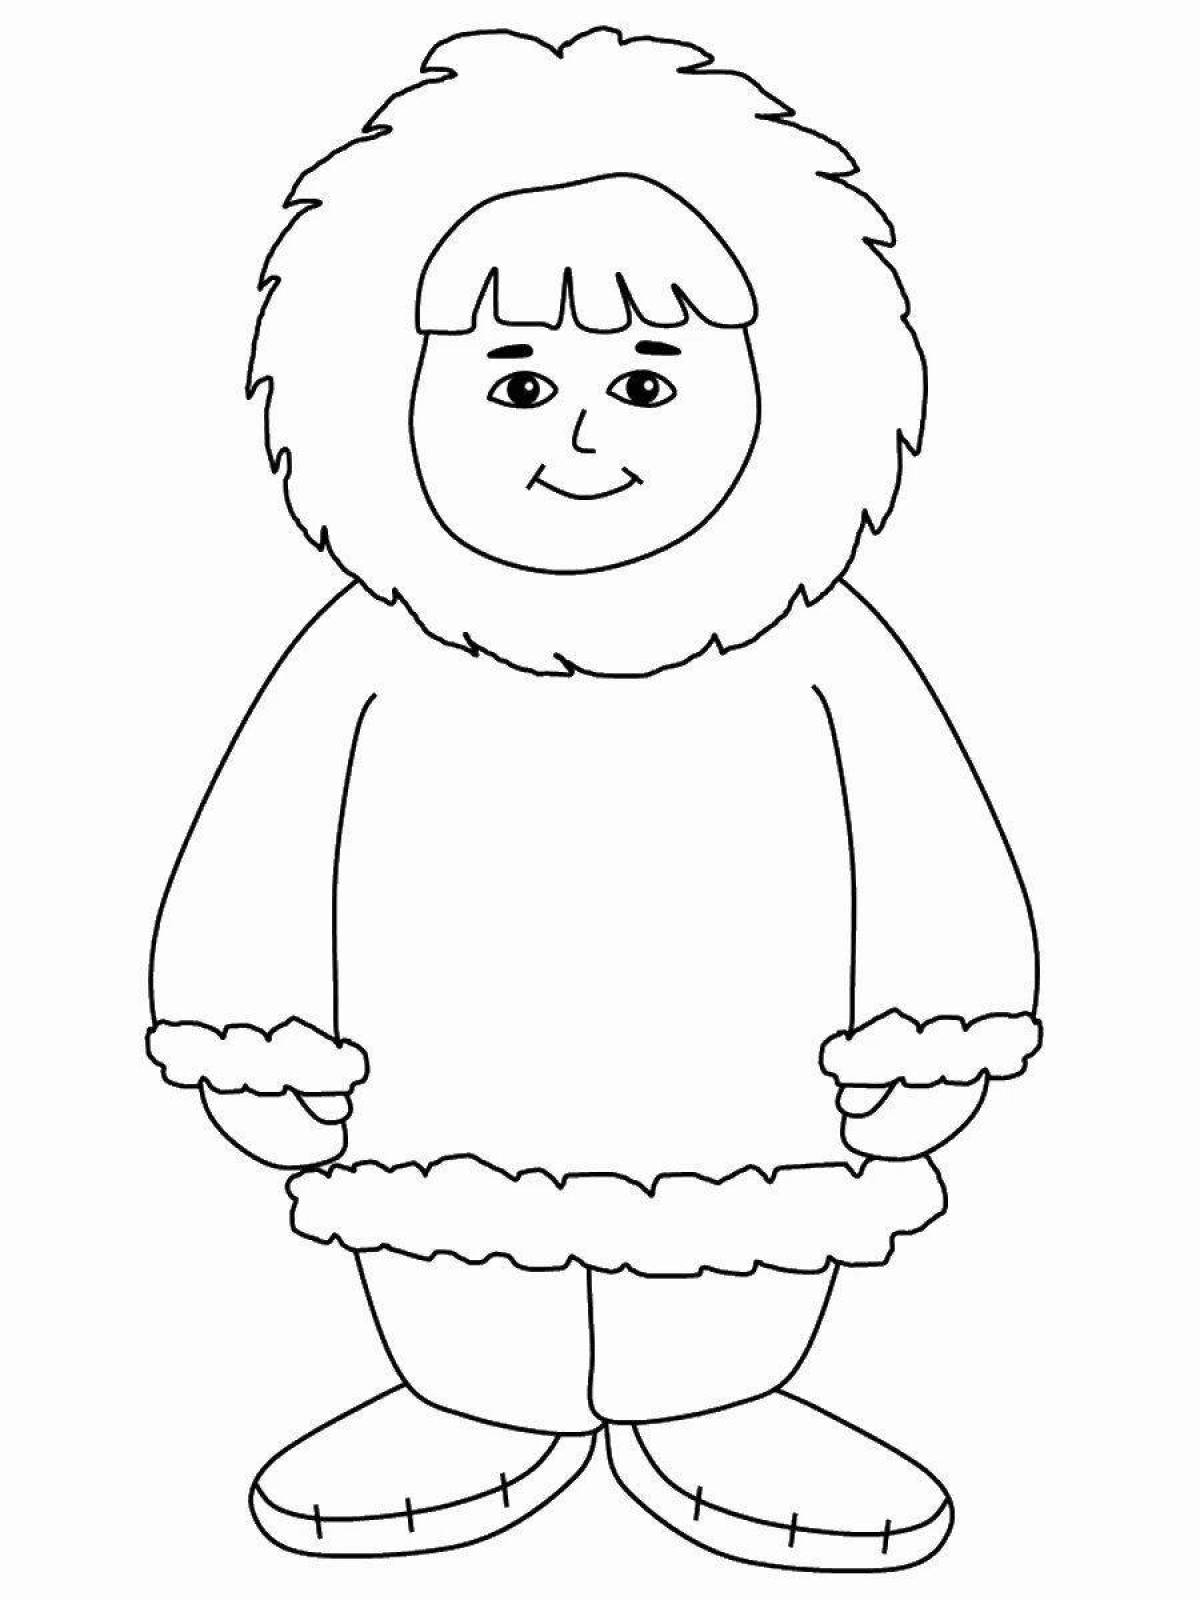 Sunny eskimo children's coloring pages